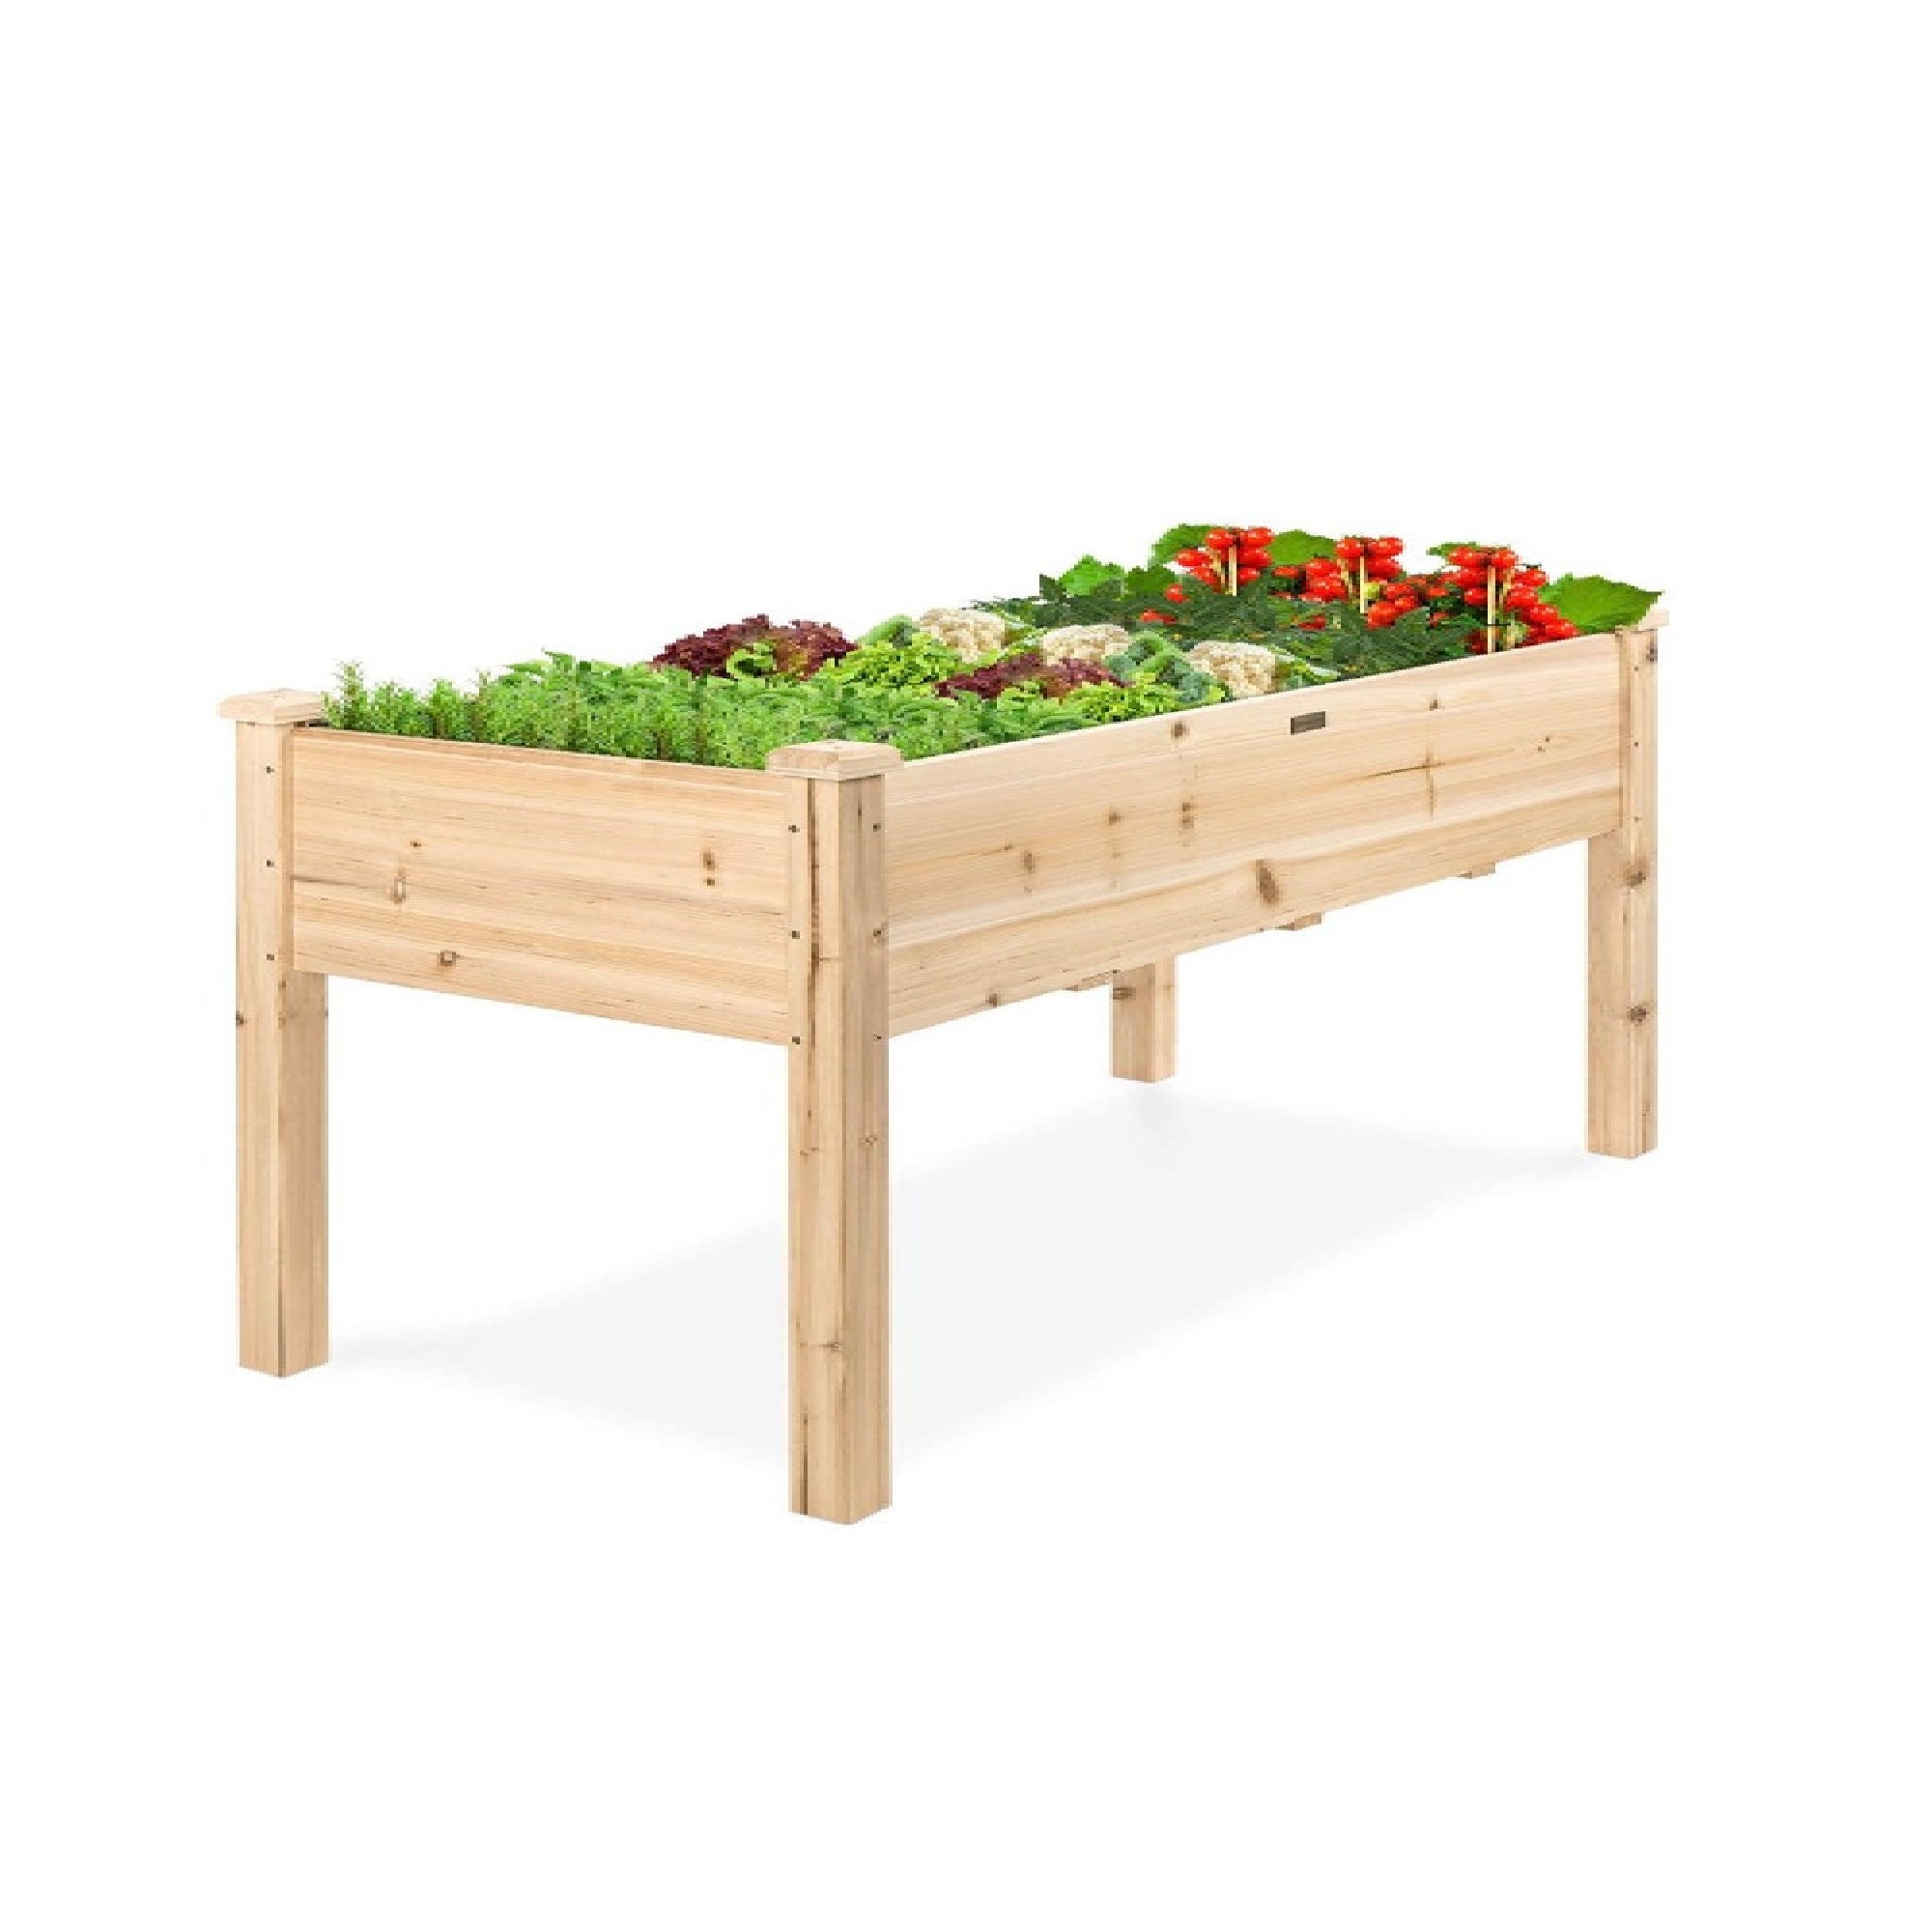 Cedar Raised Garden Bed Vegetable Elevated Planter Box for Growing and Planting Herbs Fruit 48x24x30'' Flower w/ Bed Liner 